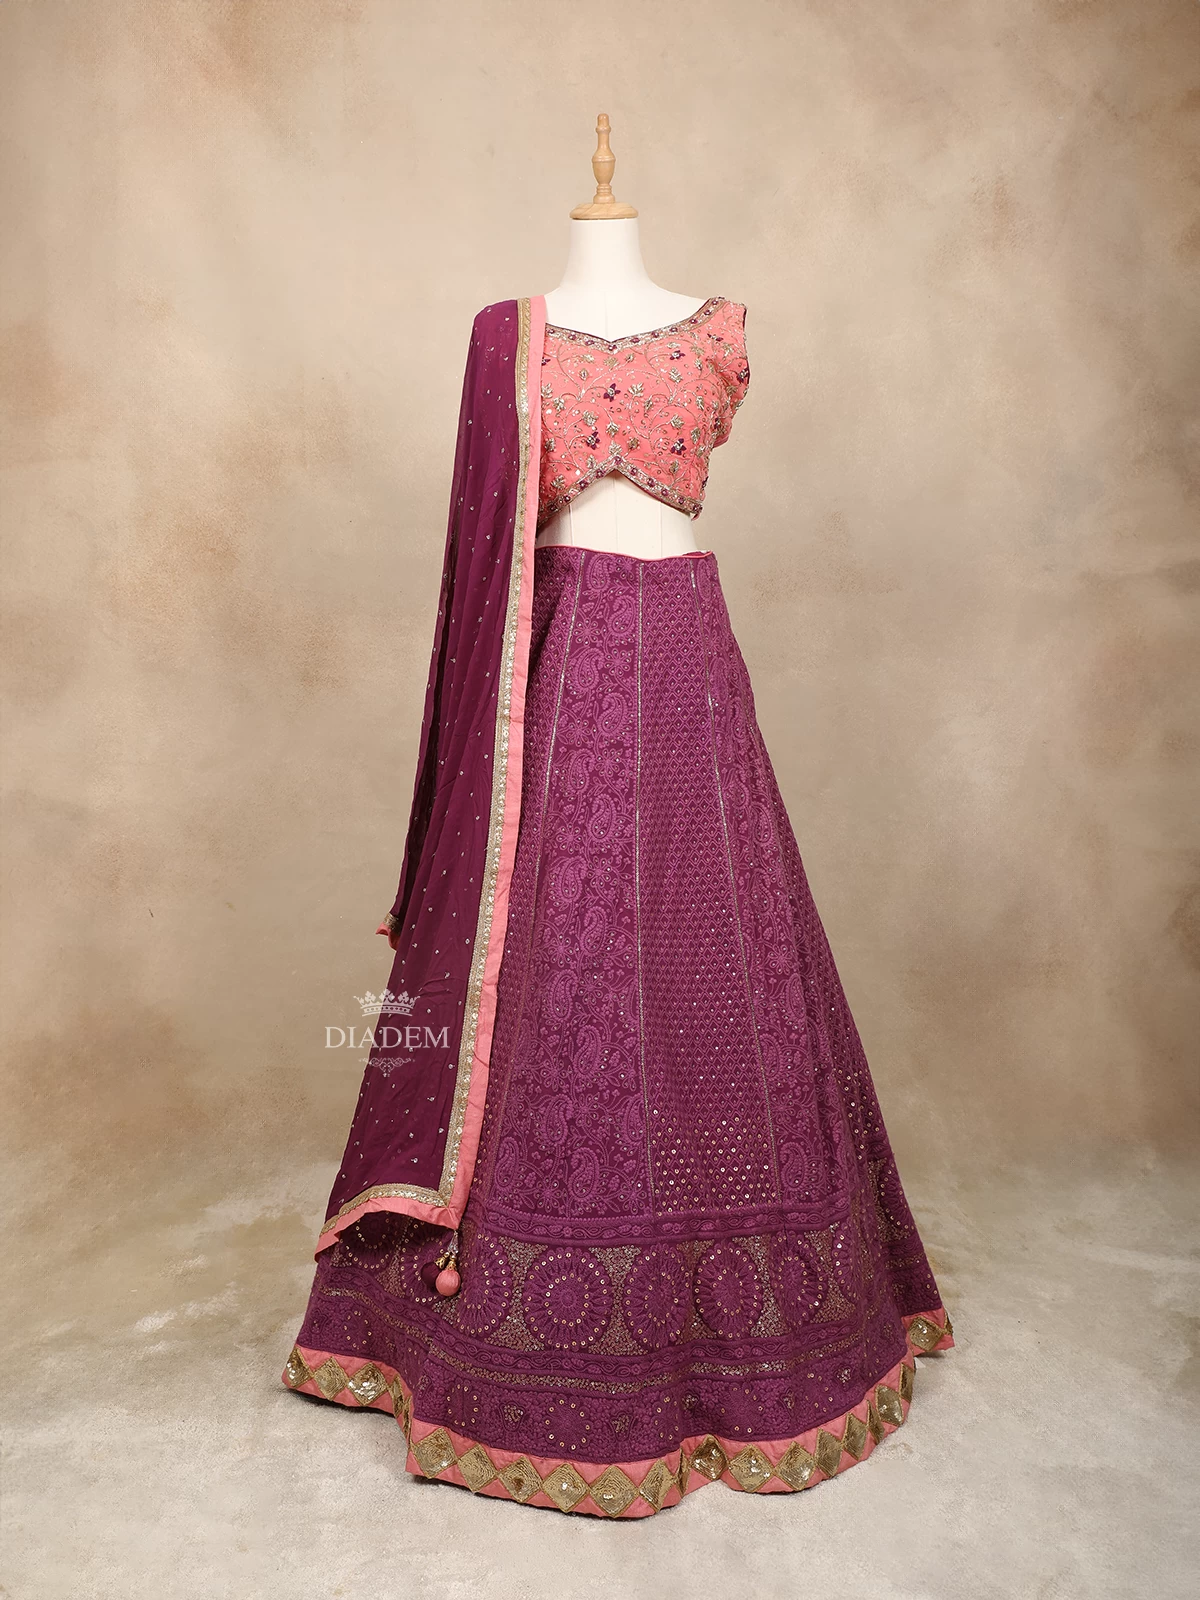 Purple Silk Lehenga Adorned with Floral Threadwork Embroidery and Beads, Paired with Dupatta